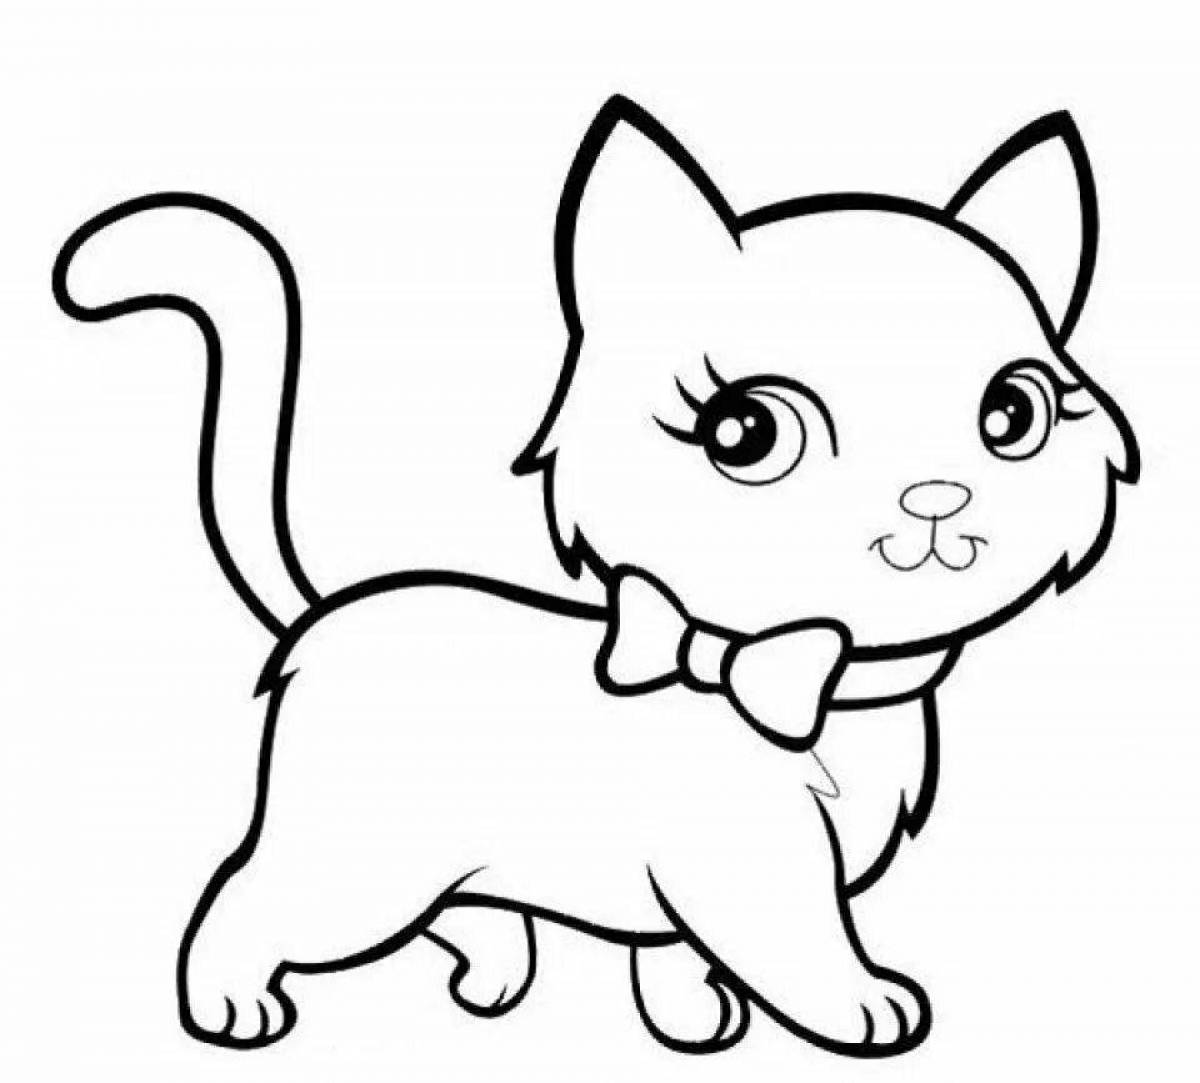 Coloring page adorable cat with a bow